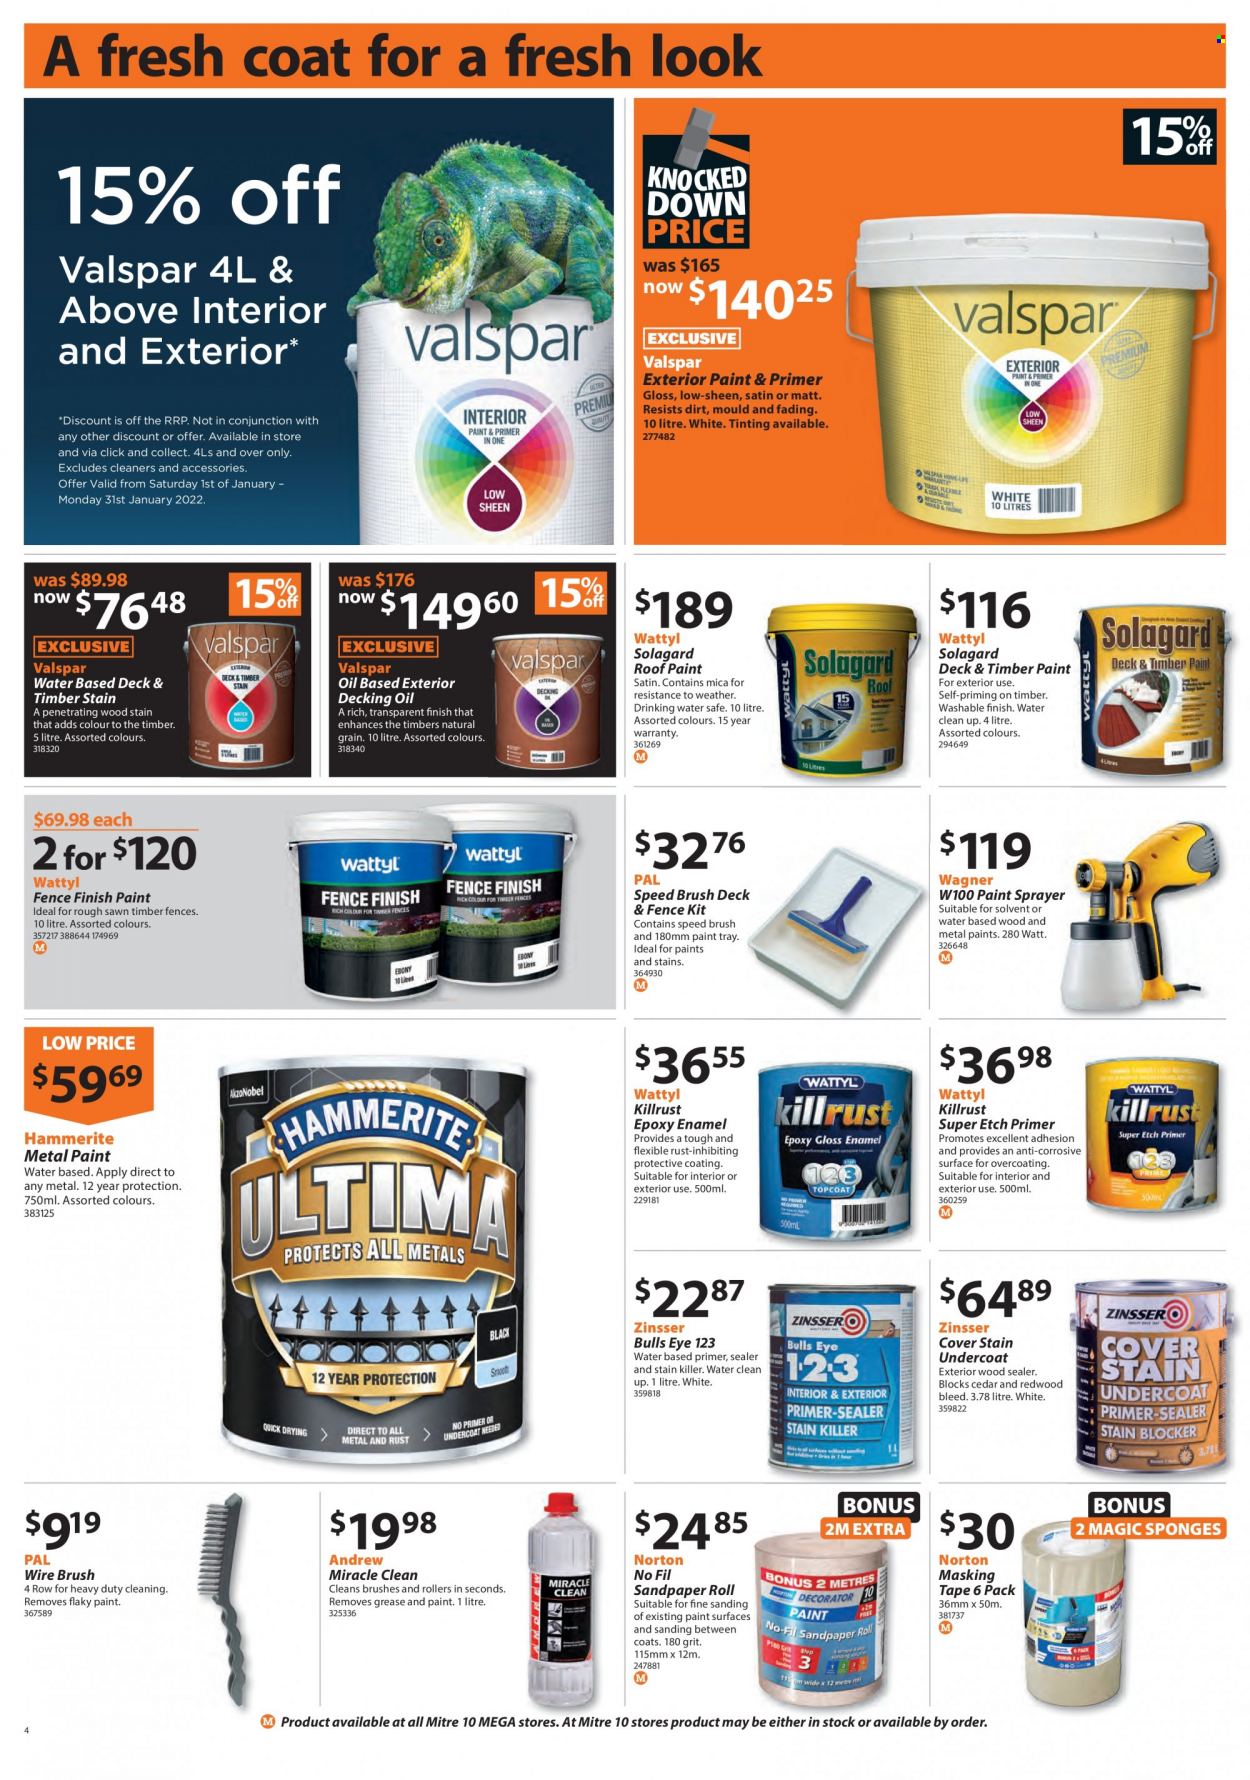 thumbnail - Mitre 10 mailer - 06.01.2022 - 23.01.2022 - Sales products - masking tape, paint sprayer, wire brush, sprayer, Valspar, roof paint. Page 4.